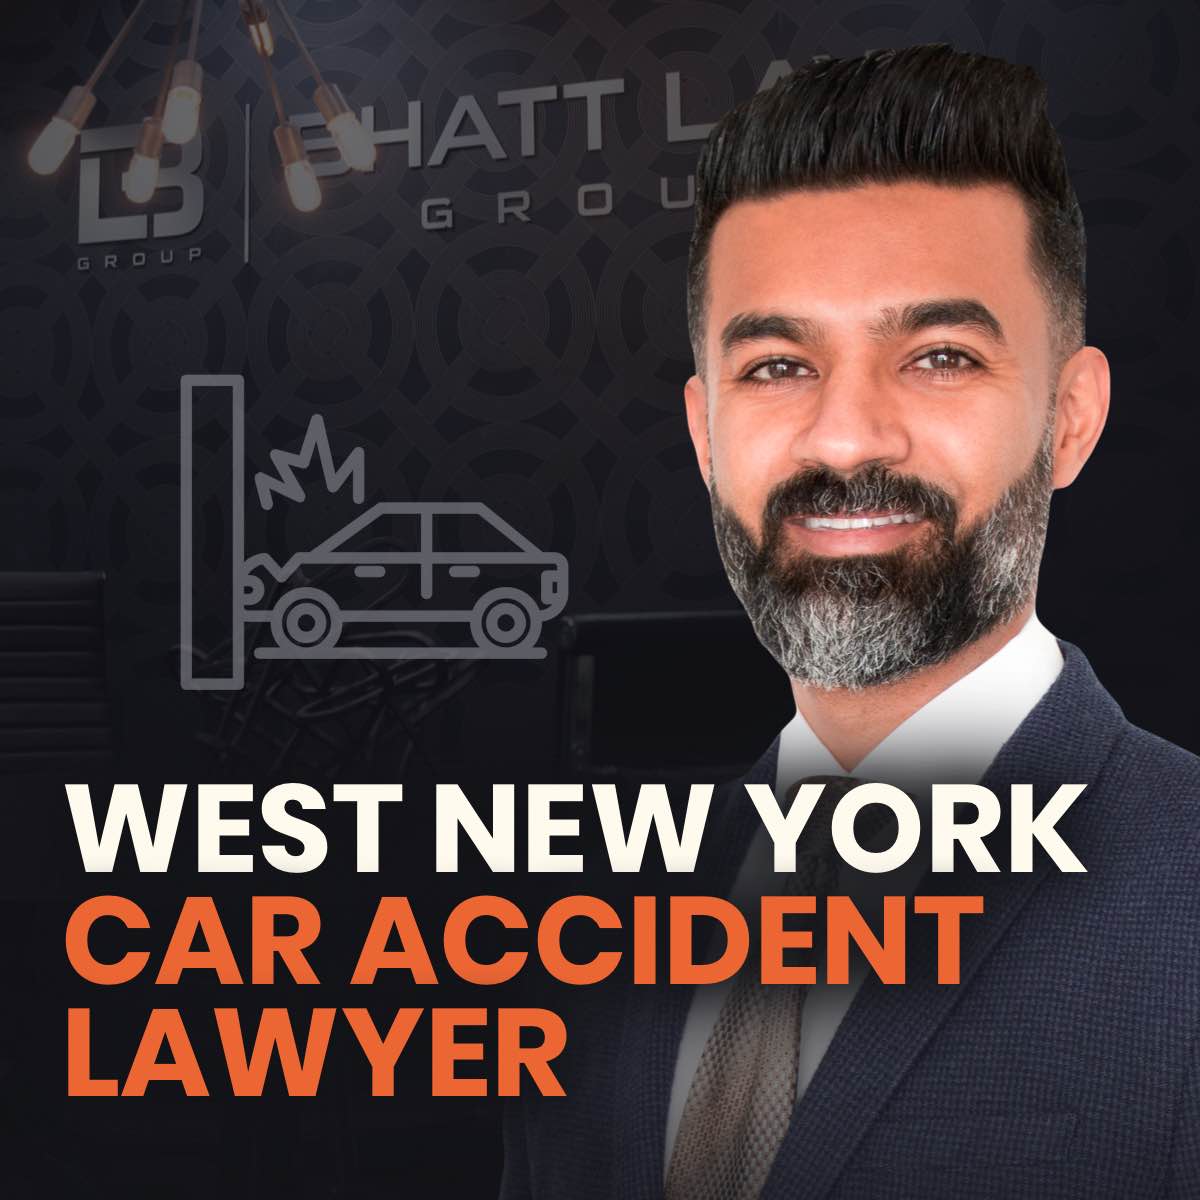 West New York Car Accident Lawyer